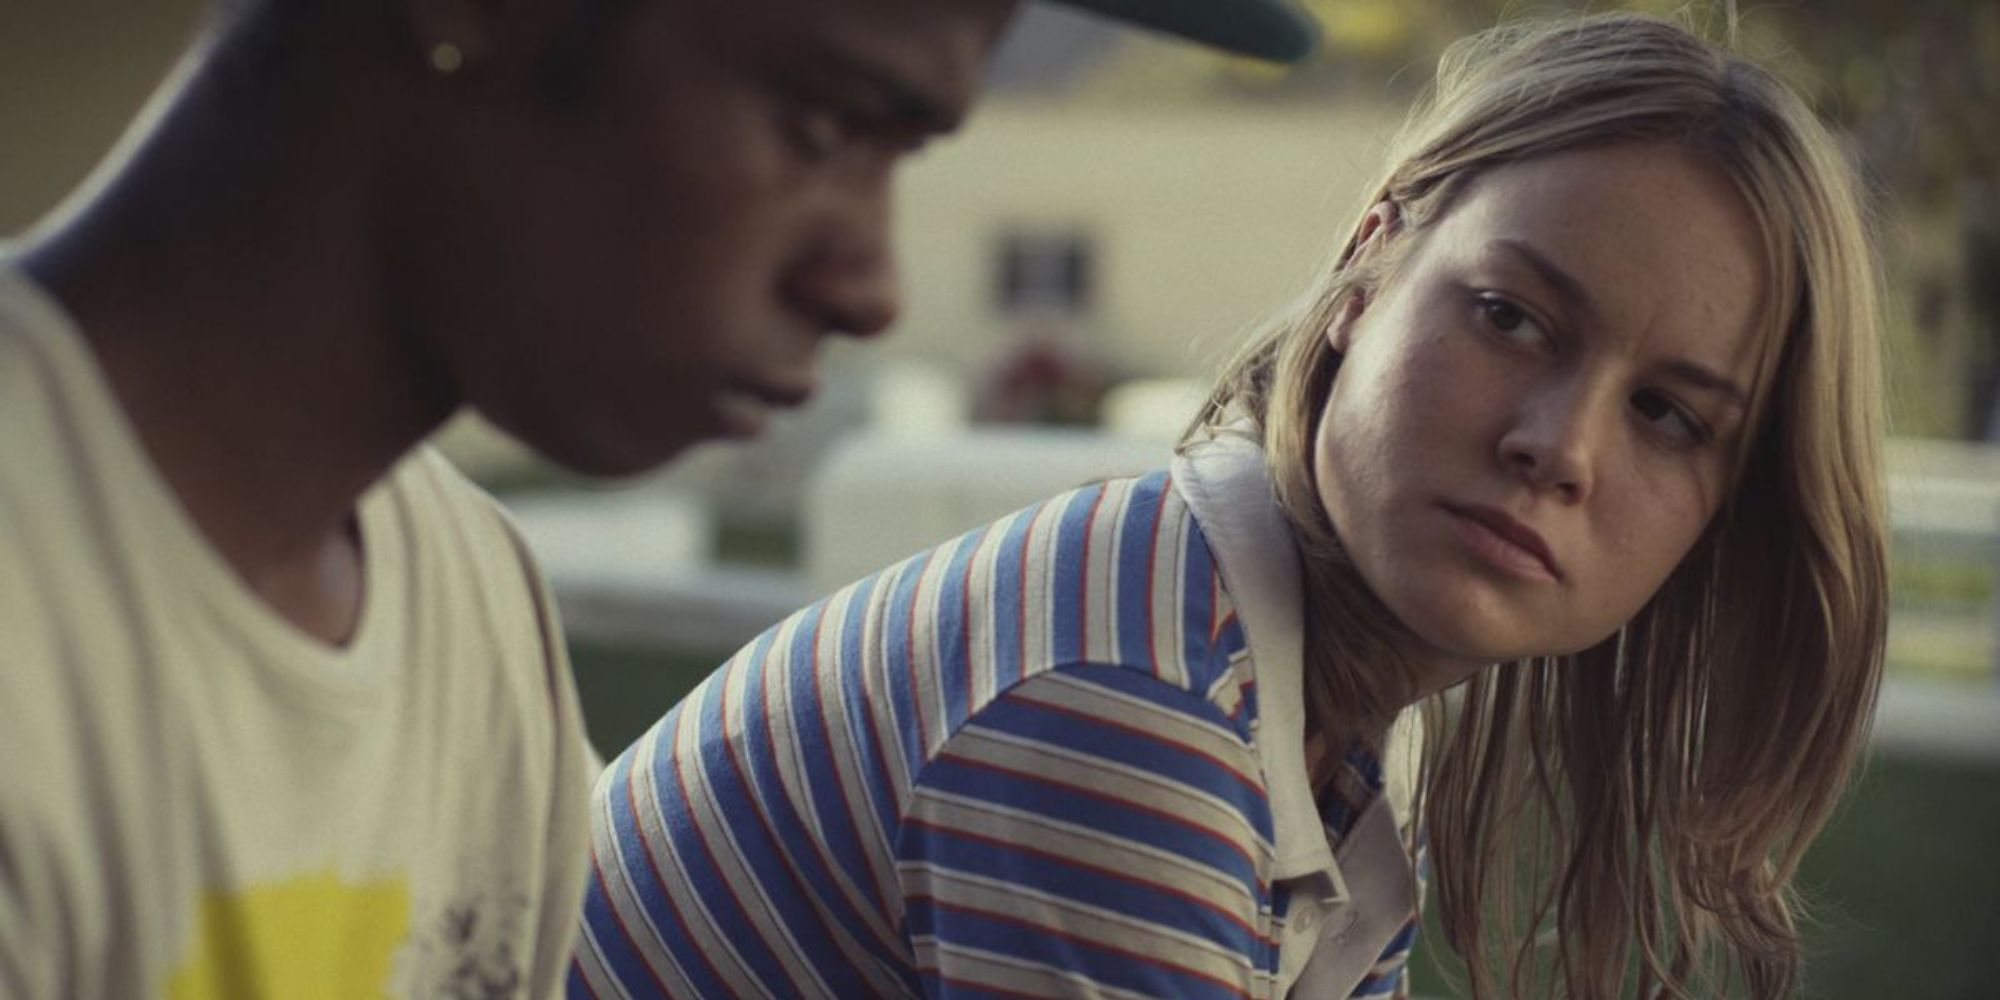 Short Term 12's Brie Larson and Lakeith Stanfield